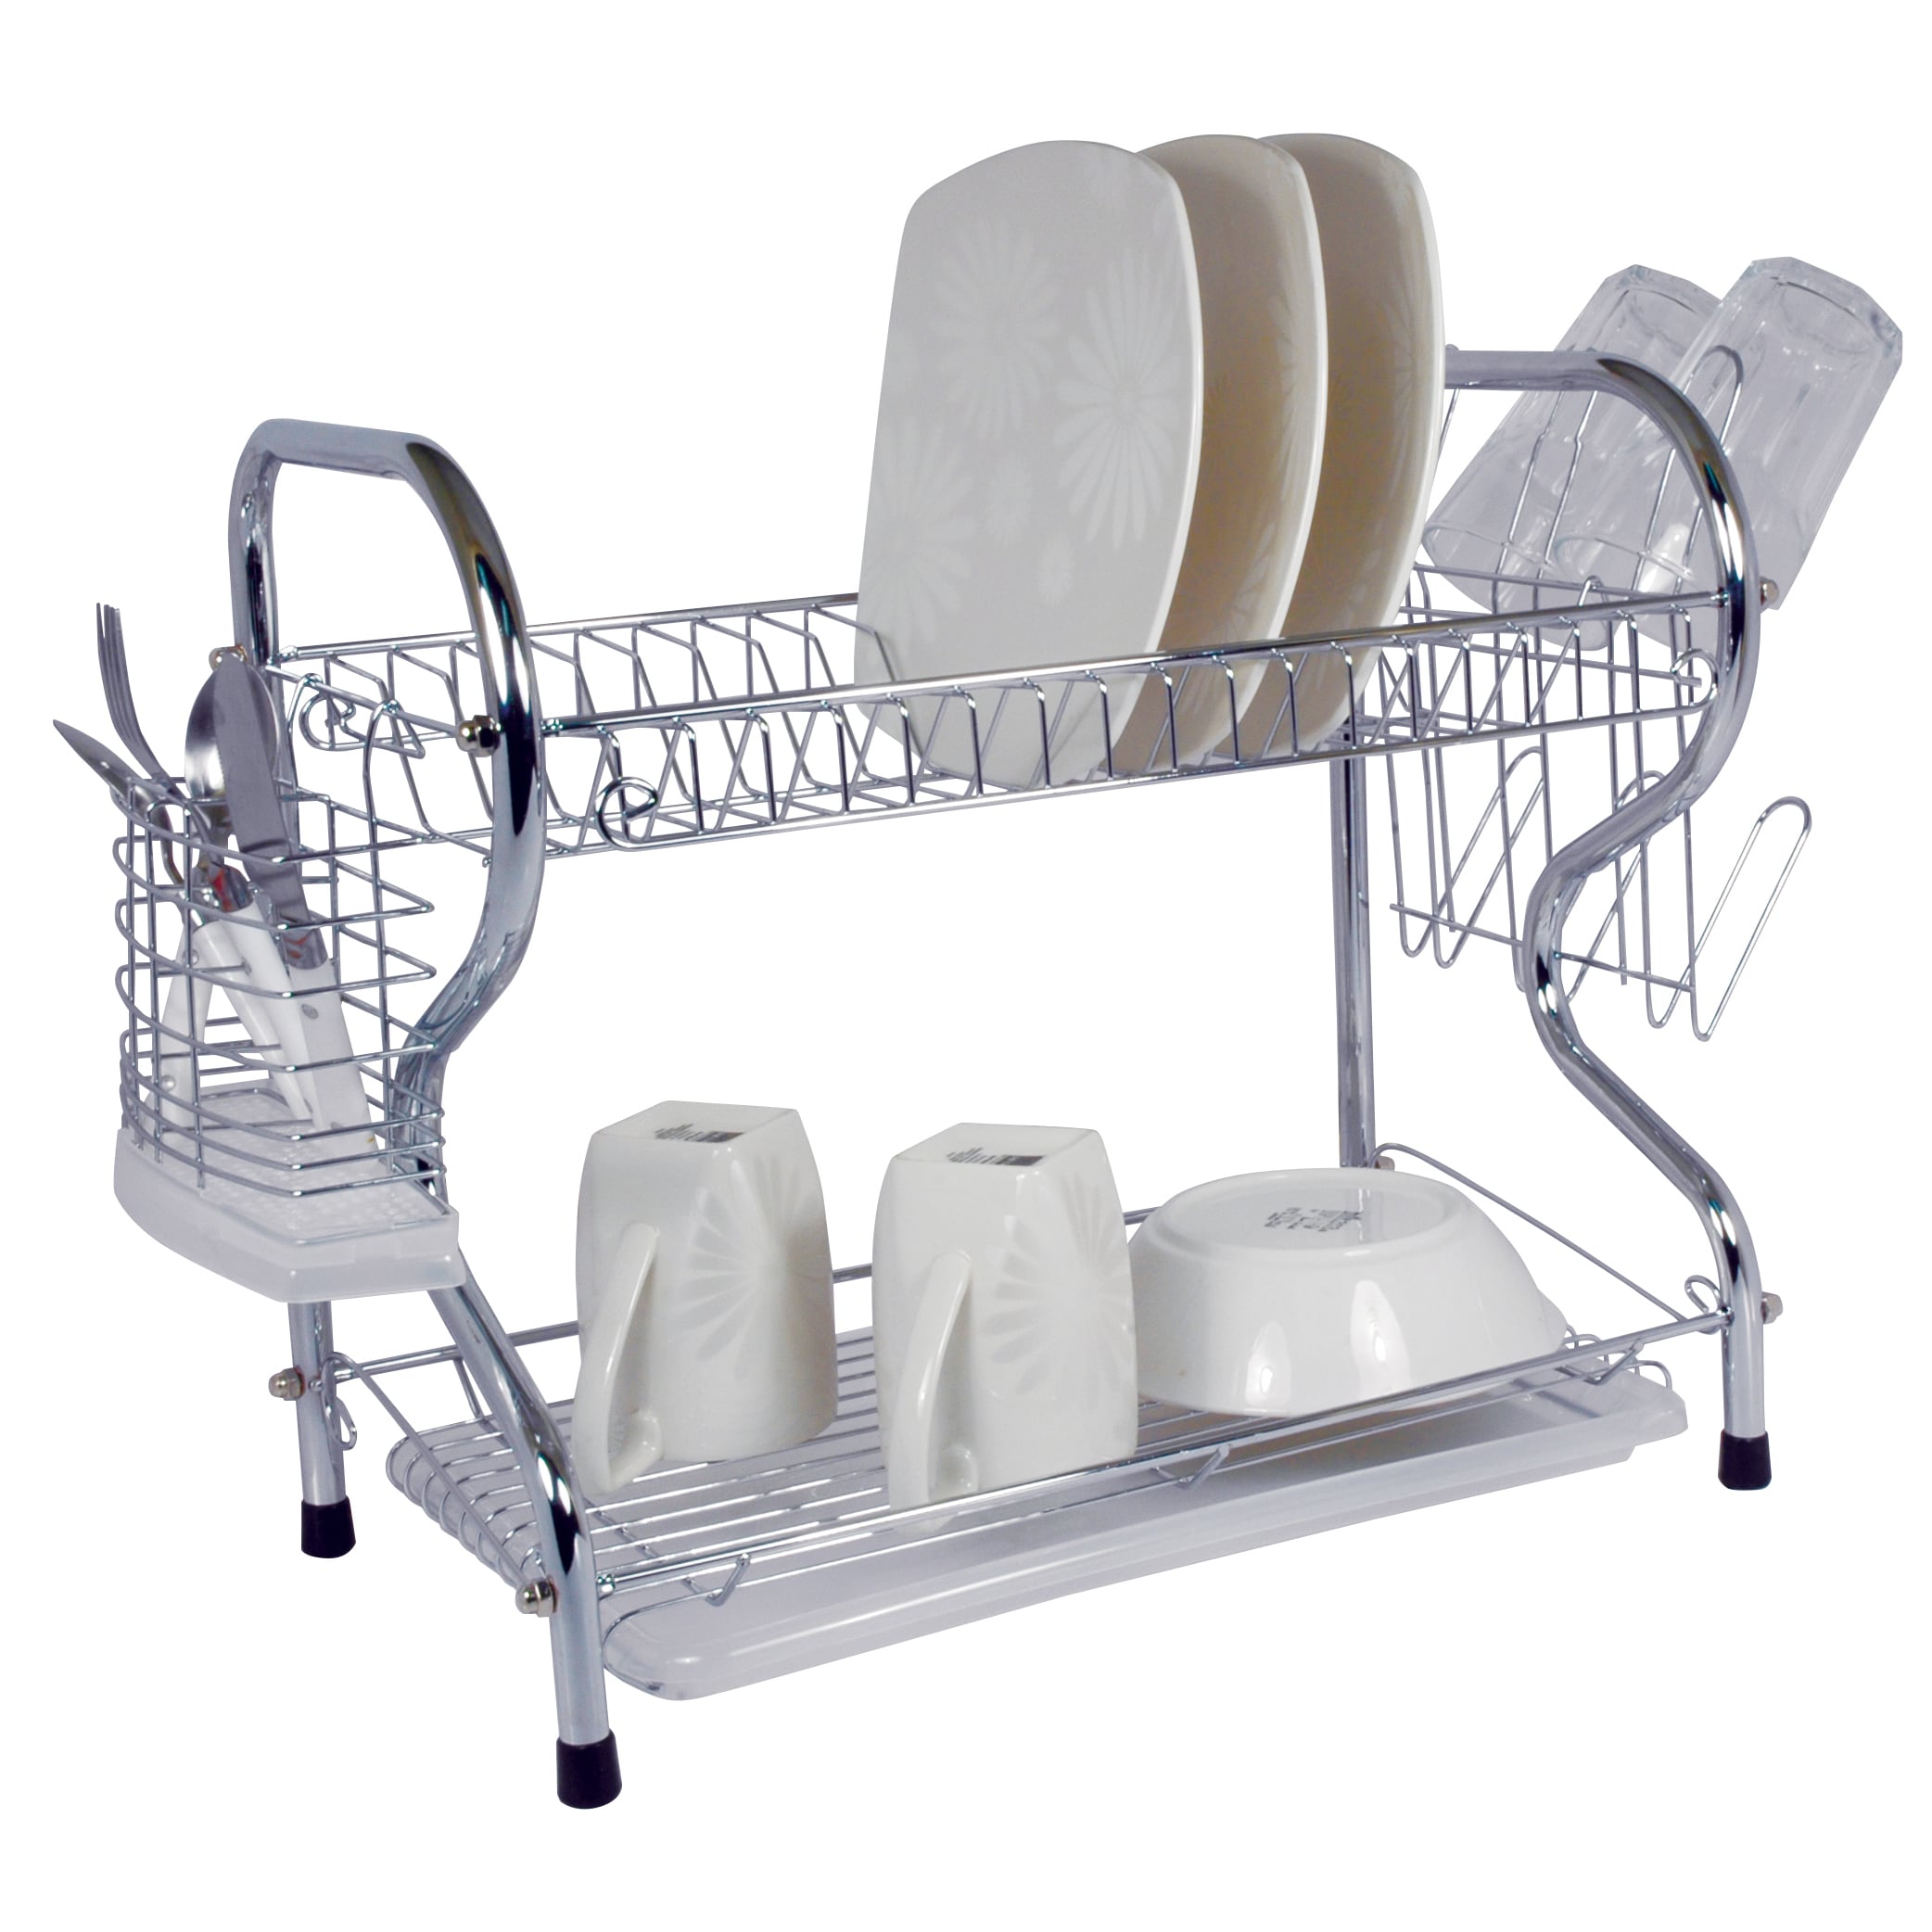 2-Tier Chrome Dish Drying Rack And DrainBoard, Kitchen Dish Cup